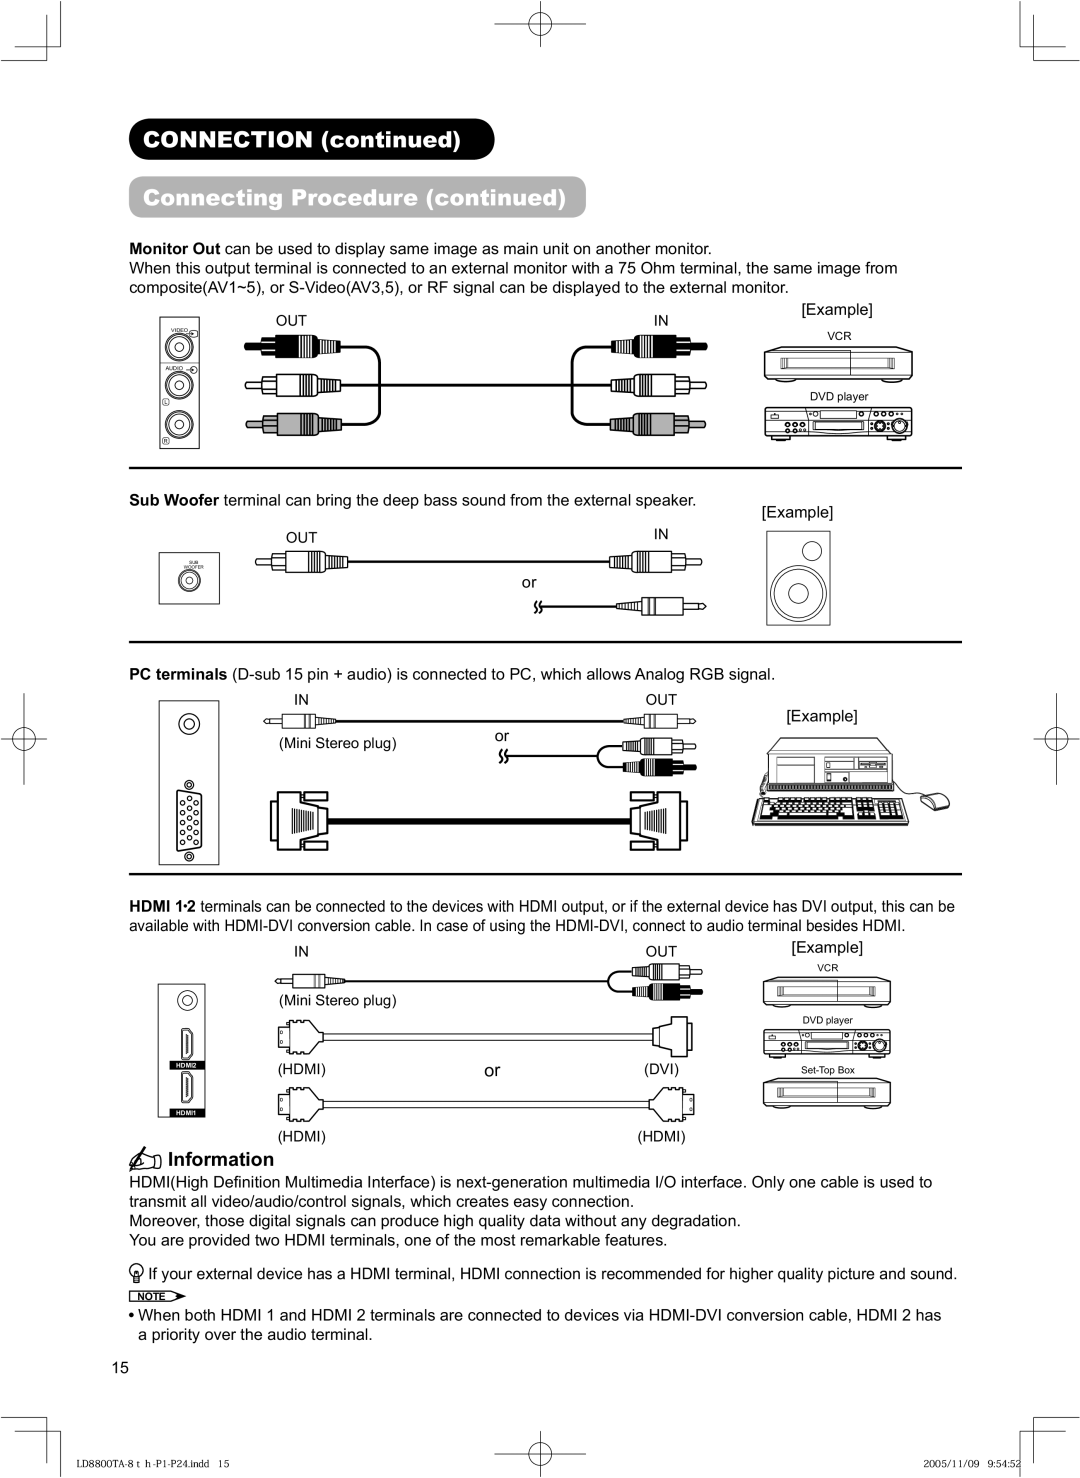 Hitachi 32LD8800TA, 37LD8800TA user manual Information, CONNECTION continued Connecting Procedure continued 